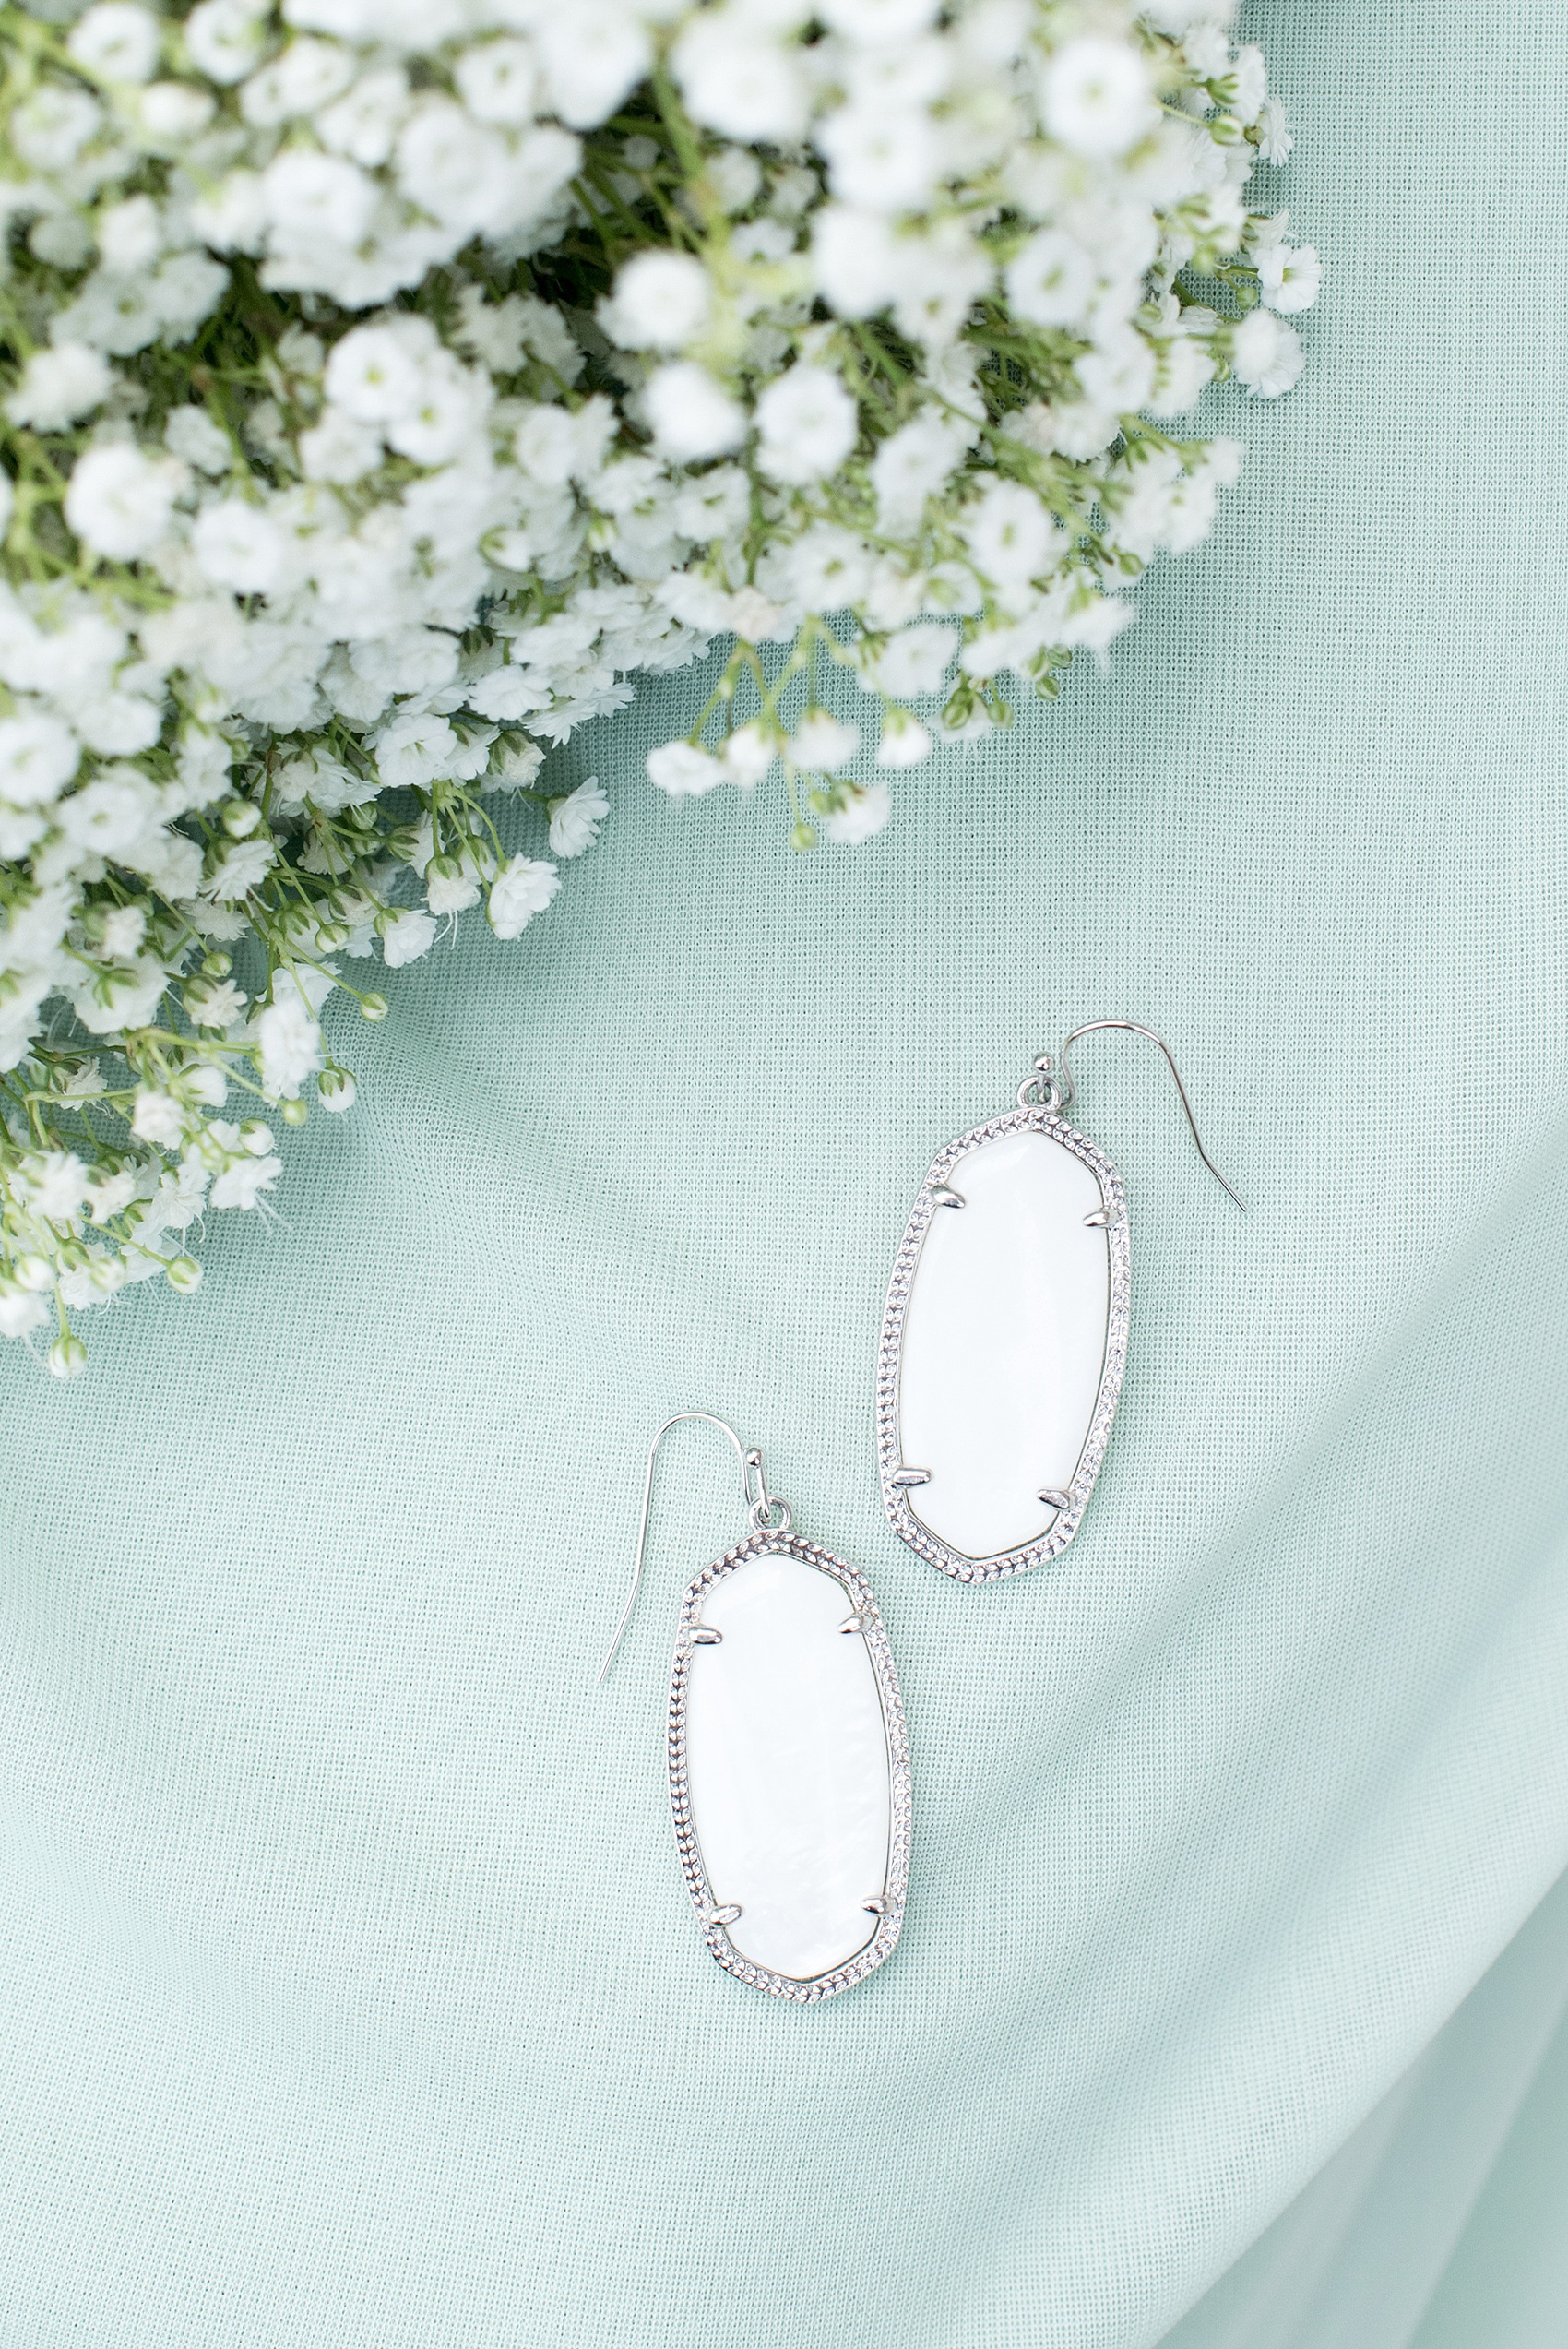 Mikkel Paige Photography photo of a Duke Chapel wedding in Durham, North Carolina. White Kendra Scott earrings for the bridesamaids gifts. 